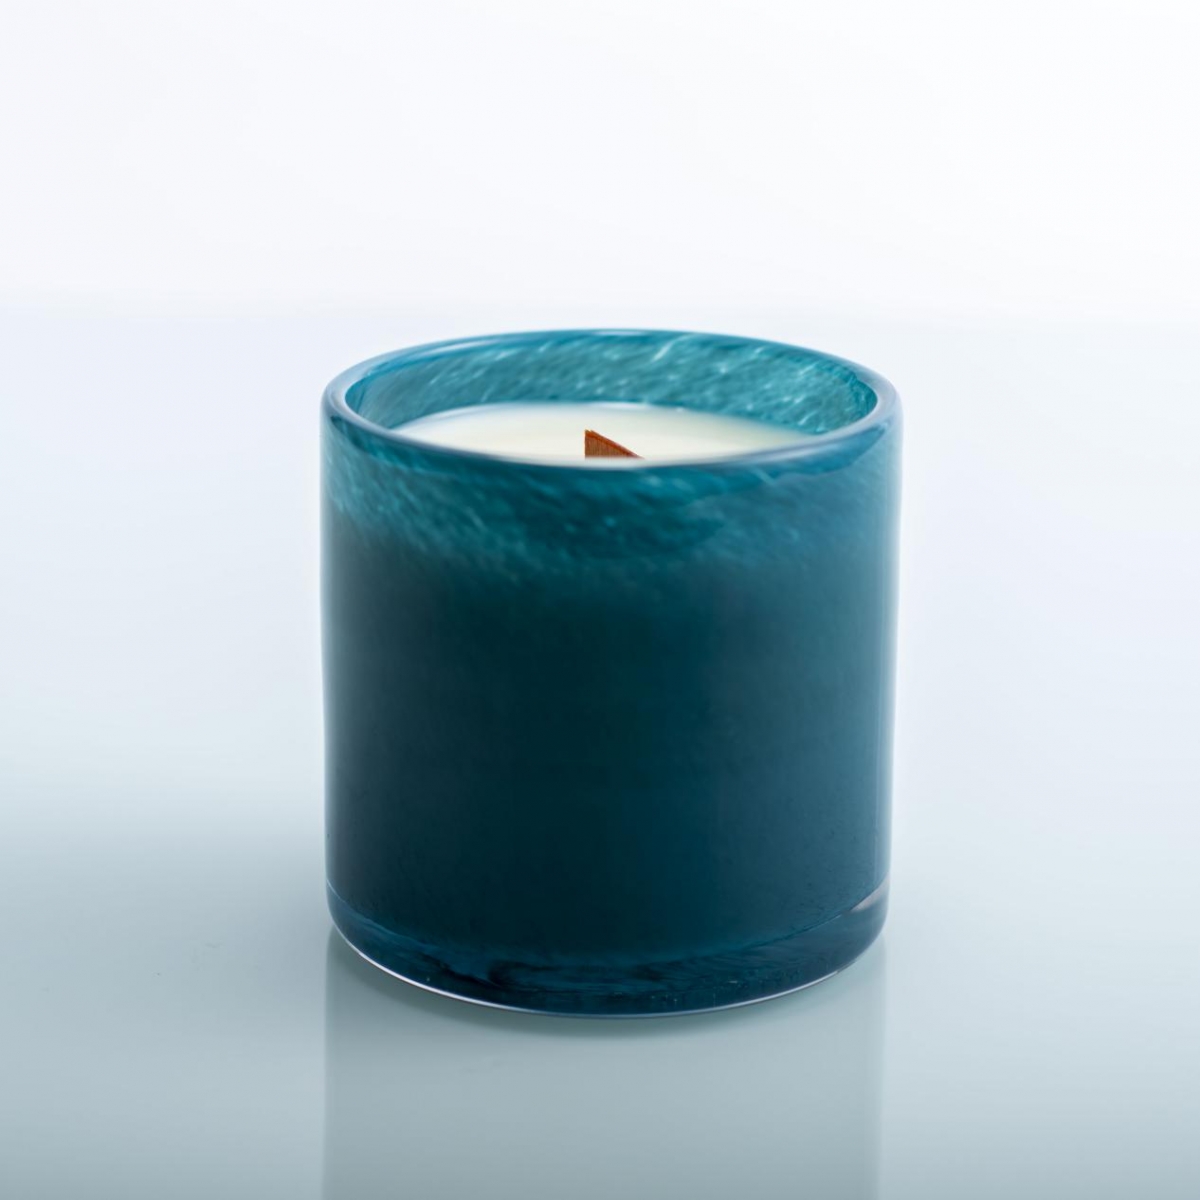 Aromatherapy Candles ：Dior Sauvage ,Beeswax Candles ,Navy Blue Glaze Glass Jar ,Wooden Wick ,China Factory , Price-HOWCANDLE-Candles,Scented Candles,Aromatherapy Candles,Soy Candles,Vegan Candles,Jar Candles,Pillar Candles,Candle Gift Sets,Essential Oils,Reed Diffuser,Candle Holder,